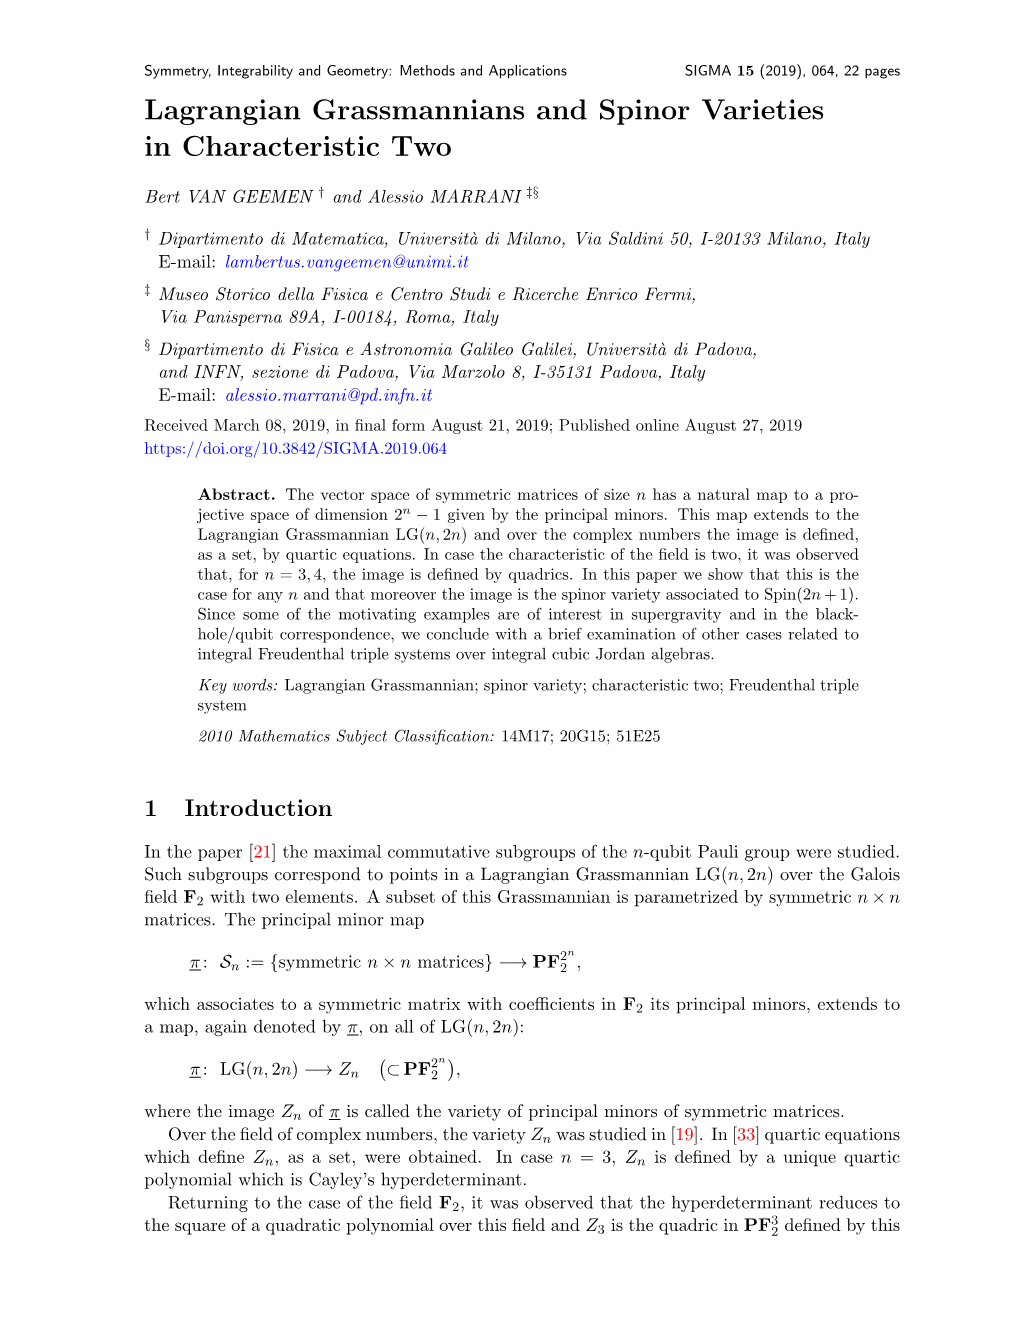 Lagrangian Grassmannians and Spinor Varieties in Characteristic Two